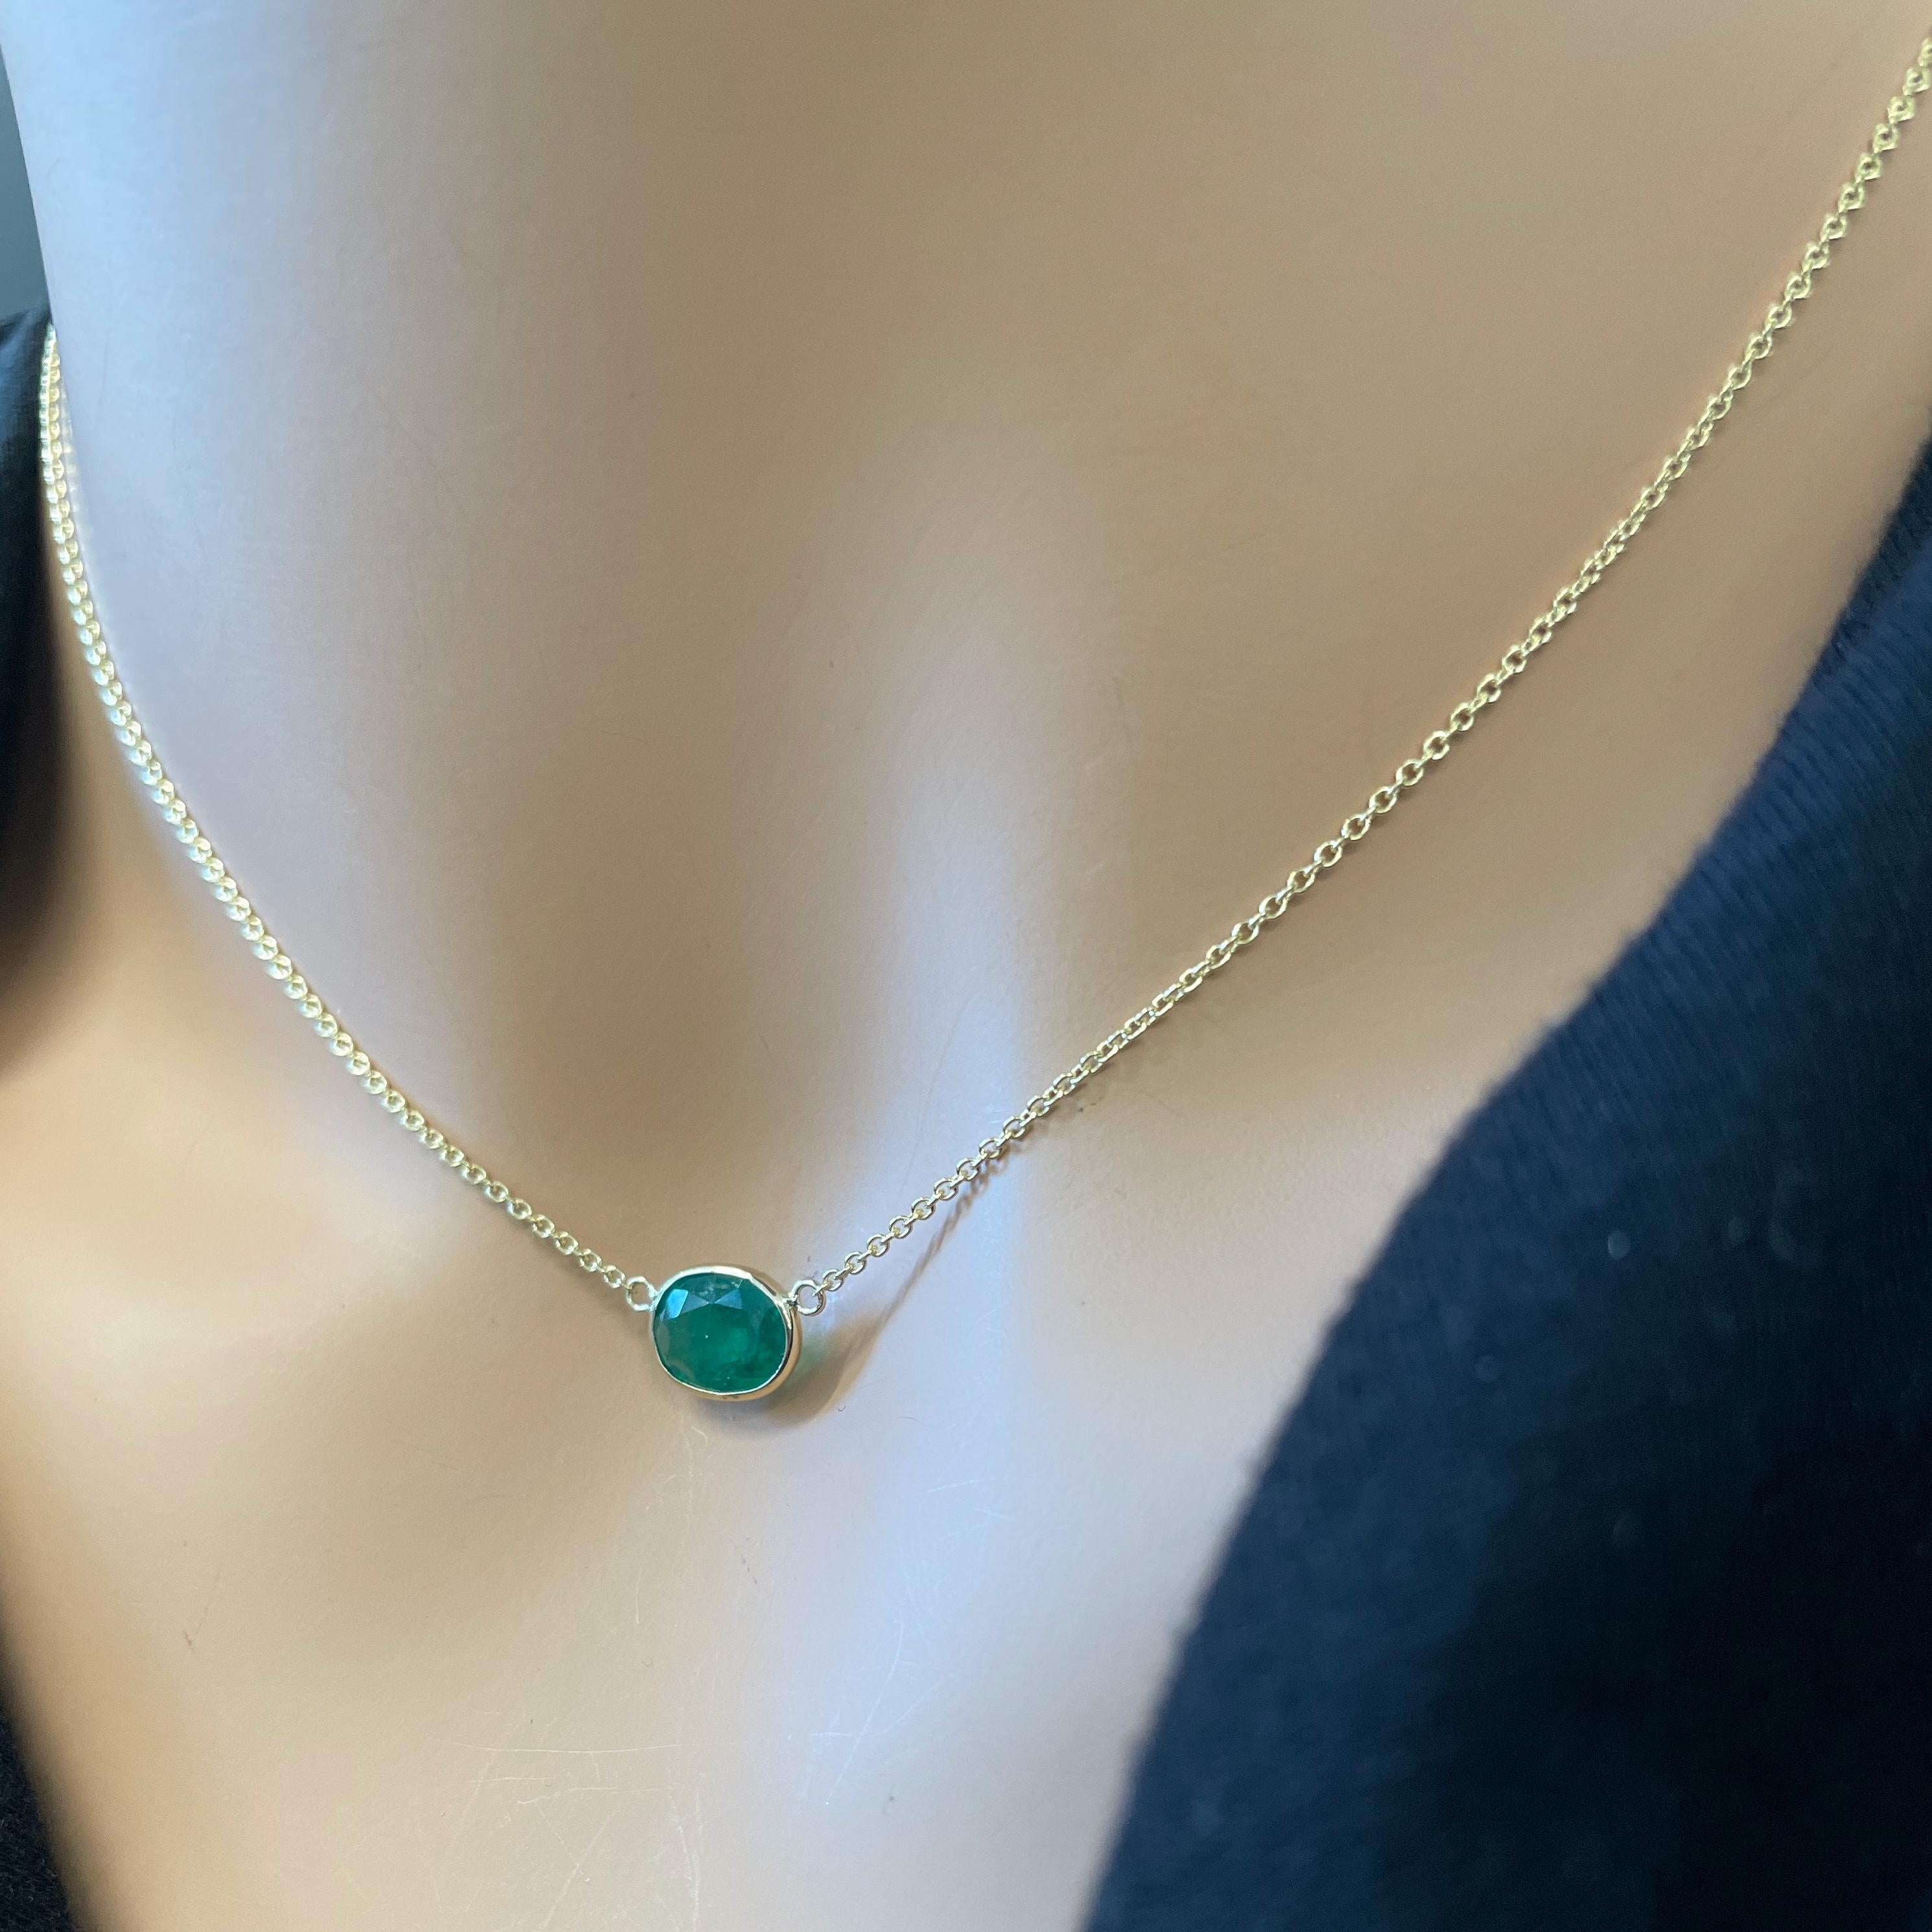 This necklace features an oval-cut green emerald with a weight of 1.65 carats, set in 14k yellow gold (YG). Emeralds are renowned for their rich green color, and the oval cut is a classic and elegant choice for gemstones, offering an elegant and